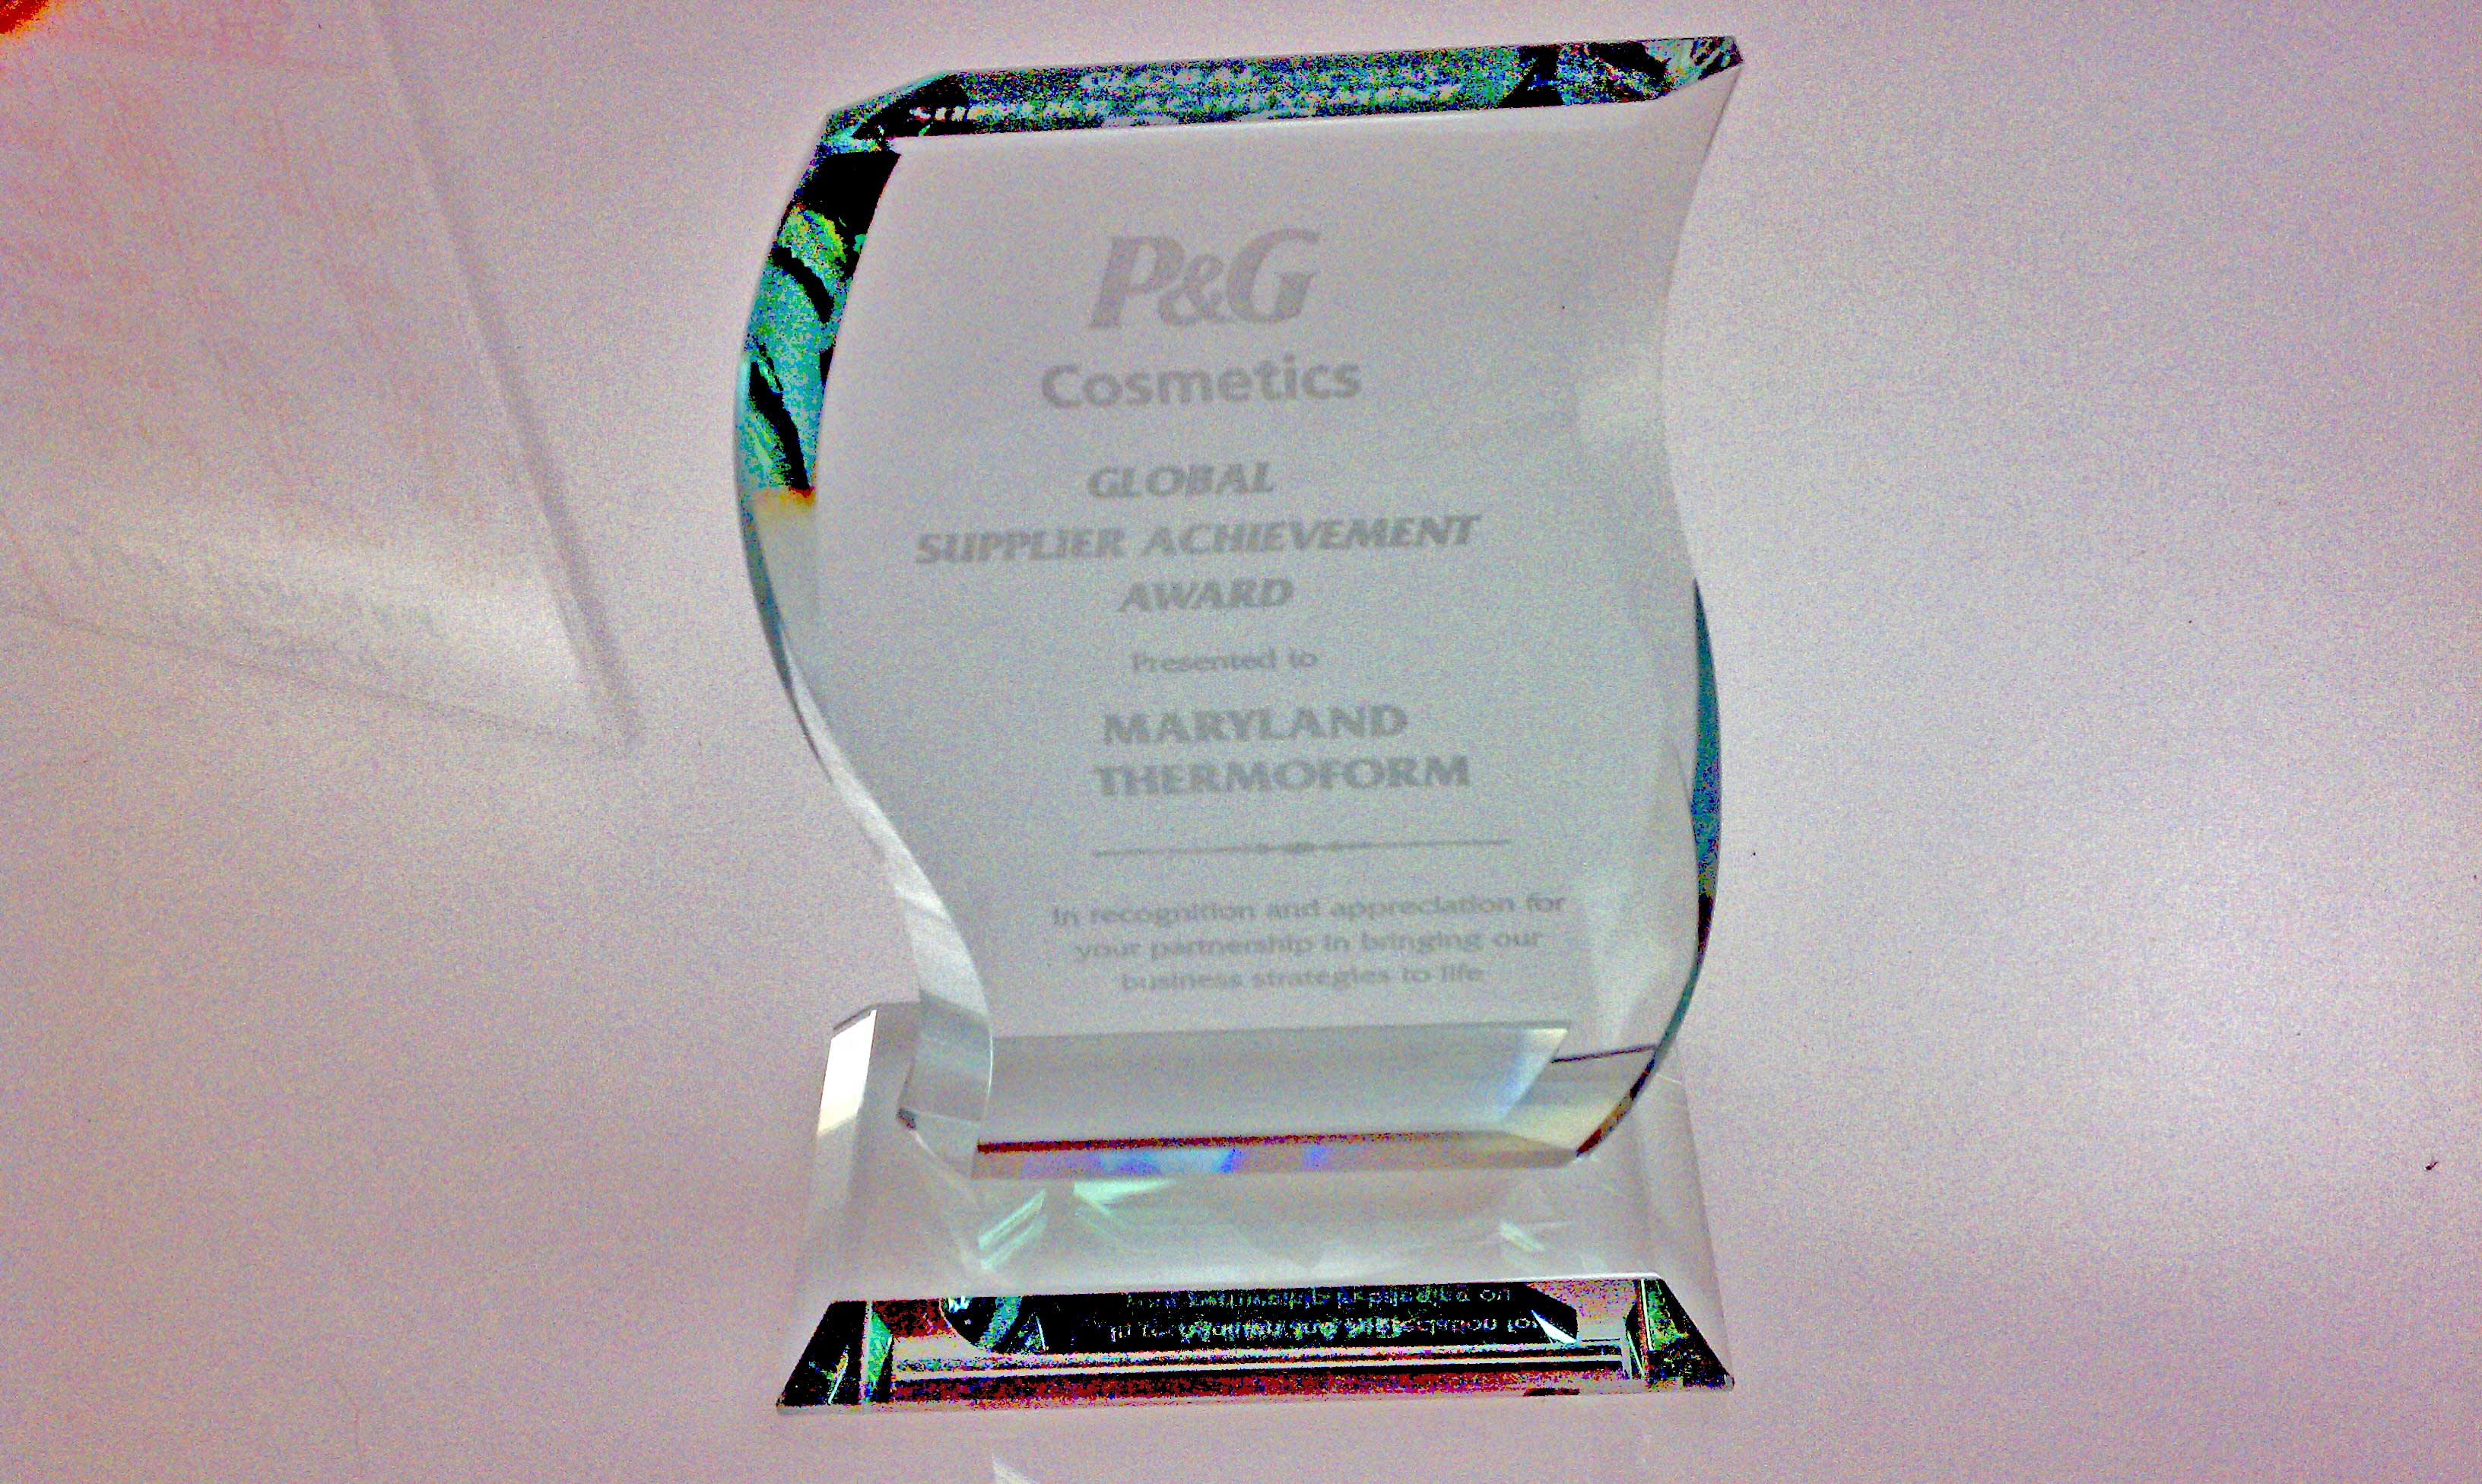 Maryland Thermoform is recognized with Global Supplier Achievement Award by Procter and Gamble